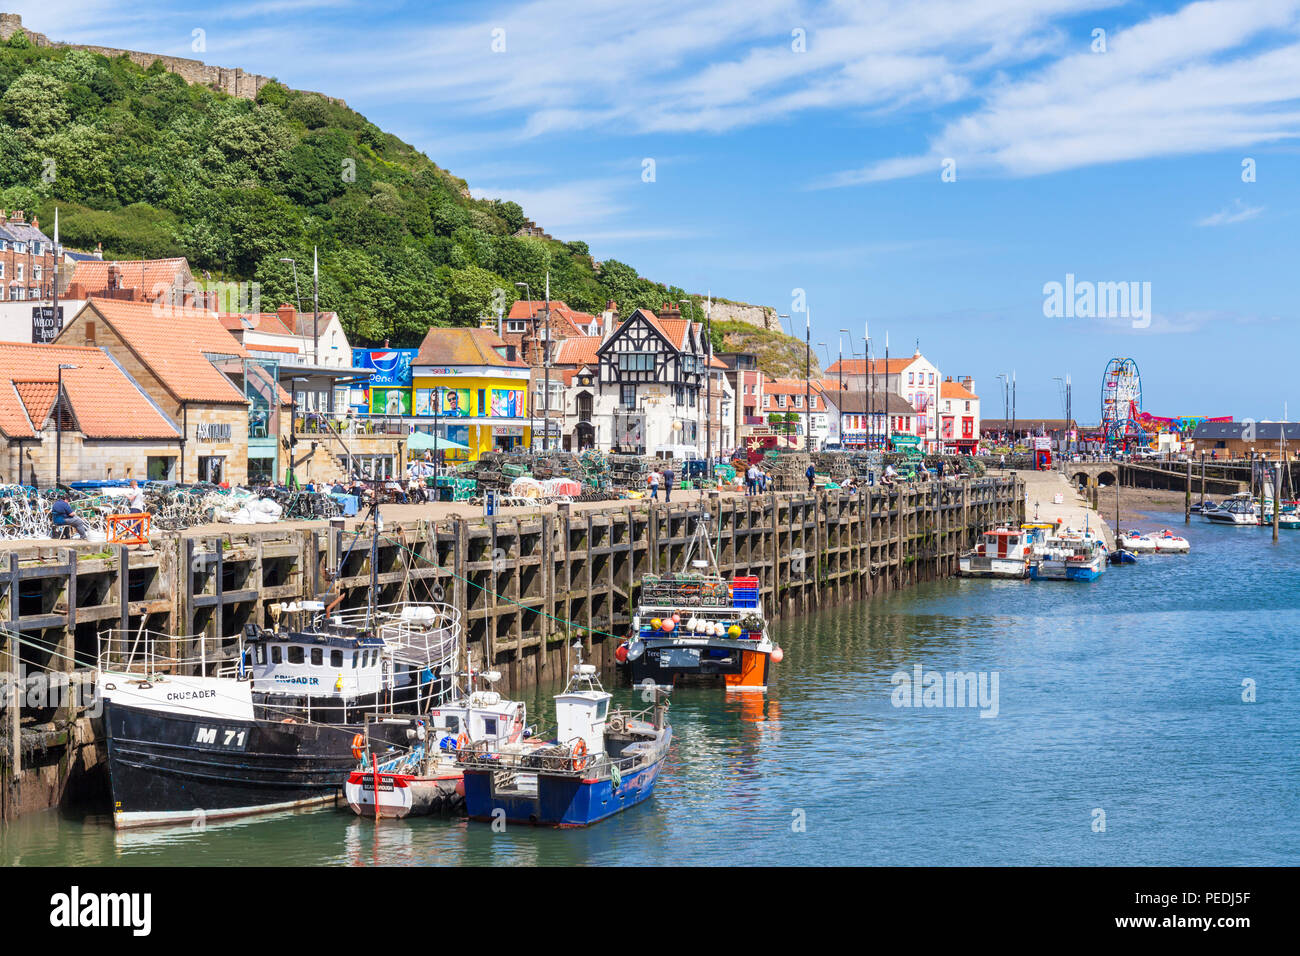 Scarborough Harbour with fishing boats and marina in south bay Scarborough UK Yorkshire north yorkshire scarborough england uk gb europe Stock Photo